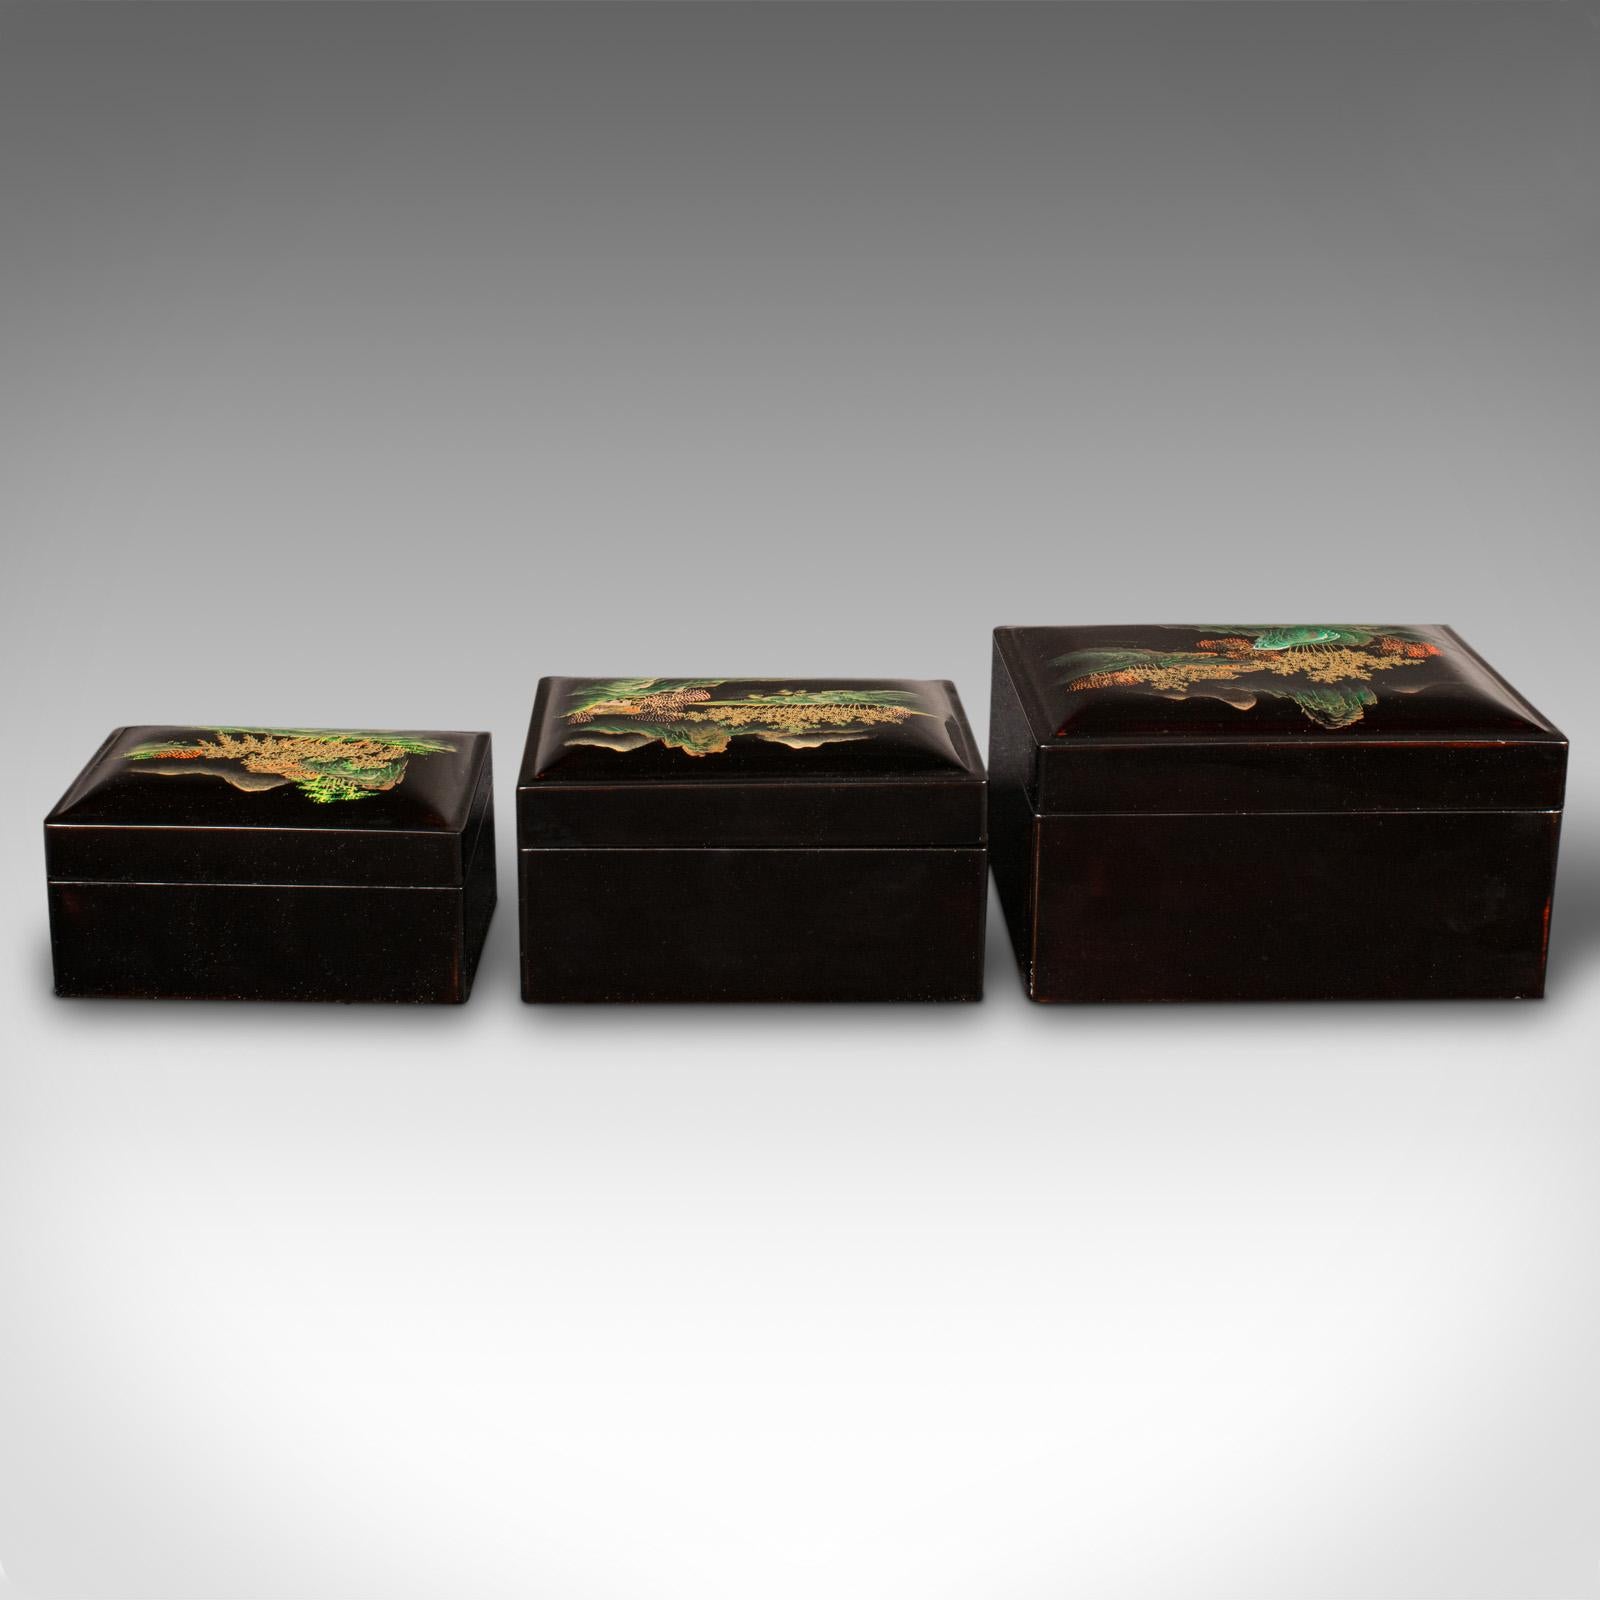 Trio Of Vintage Nesting Boxes, Japanese, Lacquered, Storage Box, Art Deco, 1940 In Good Condition For Sale In Hele, Devon, GB